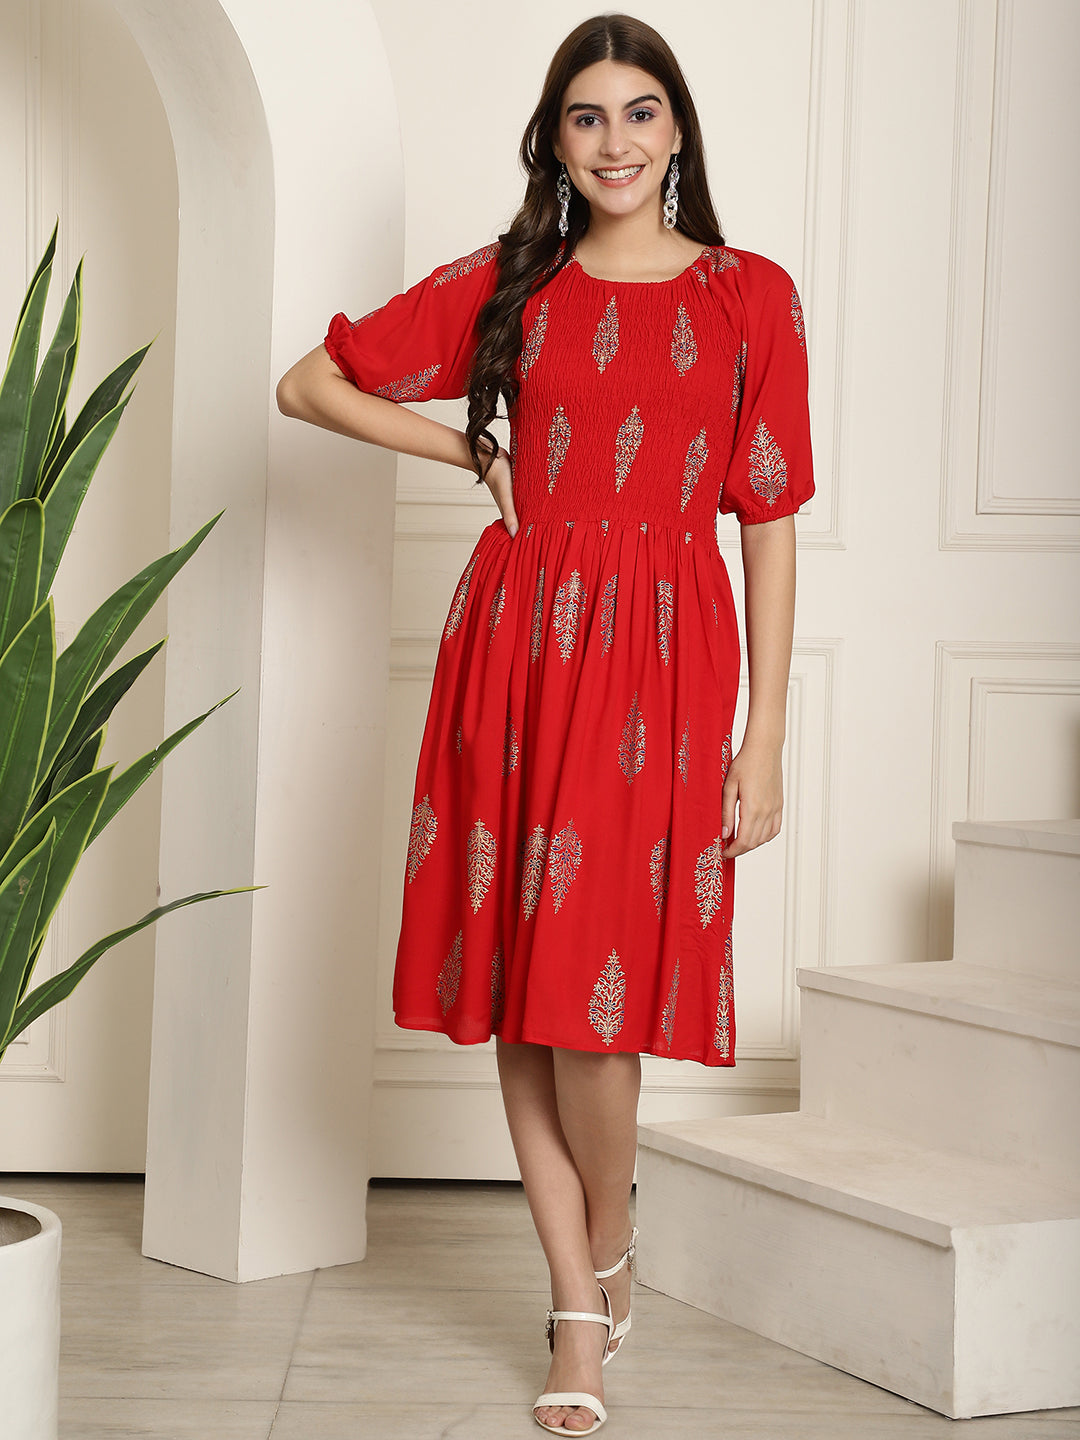 Aawari Red Patch Printed A-Line Midi Dress  With Extended Sleeves